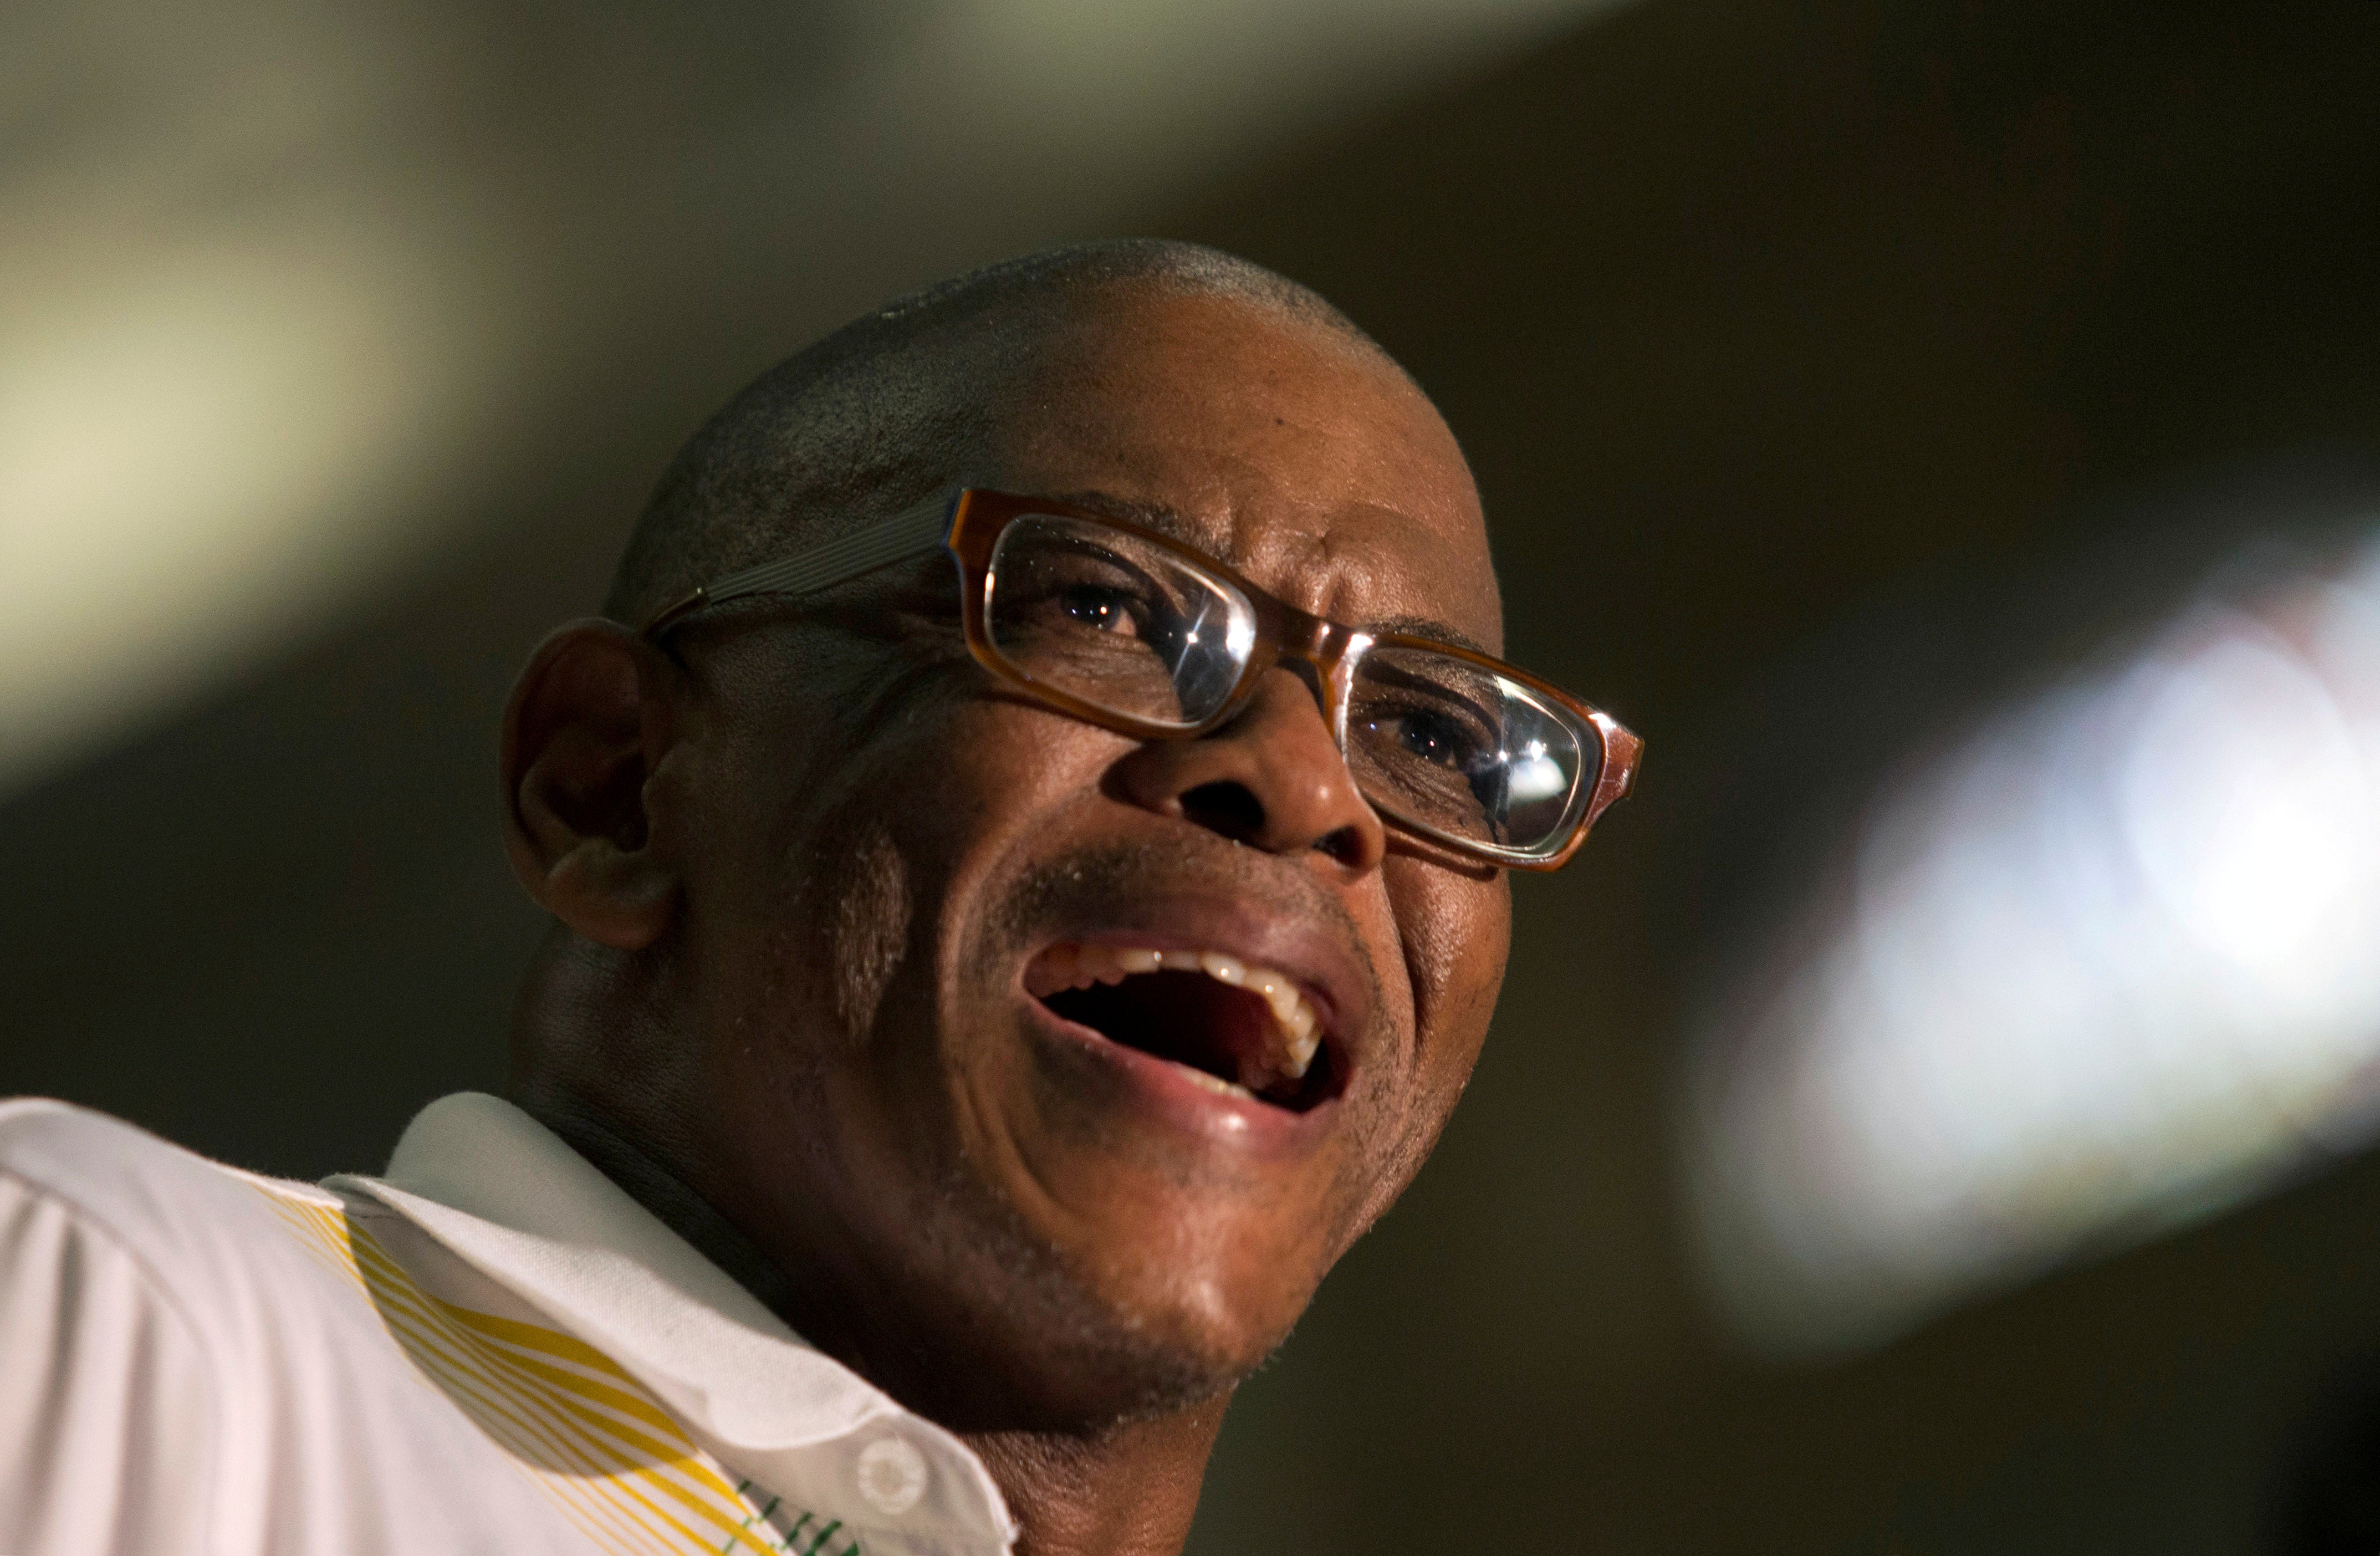 African National Congress Secretary General Ace Magashule speaks during an African National Congress Youth League rally in Pietermaritzburg, South Africa